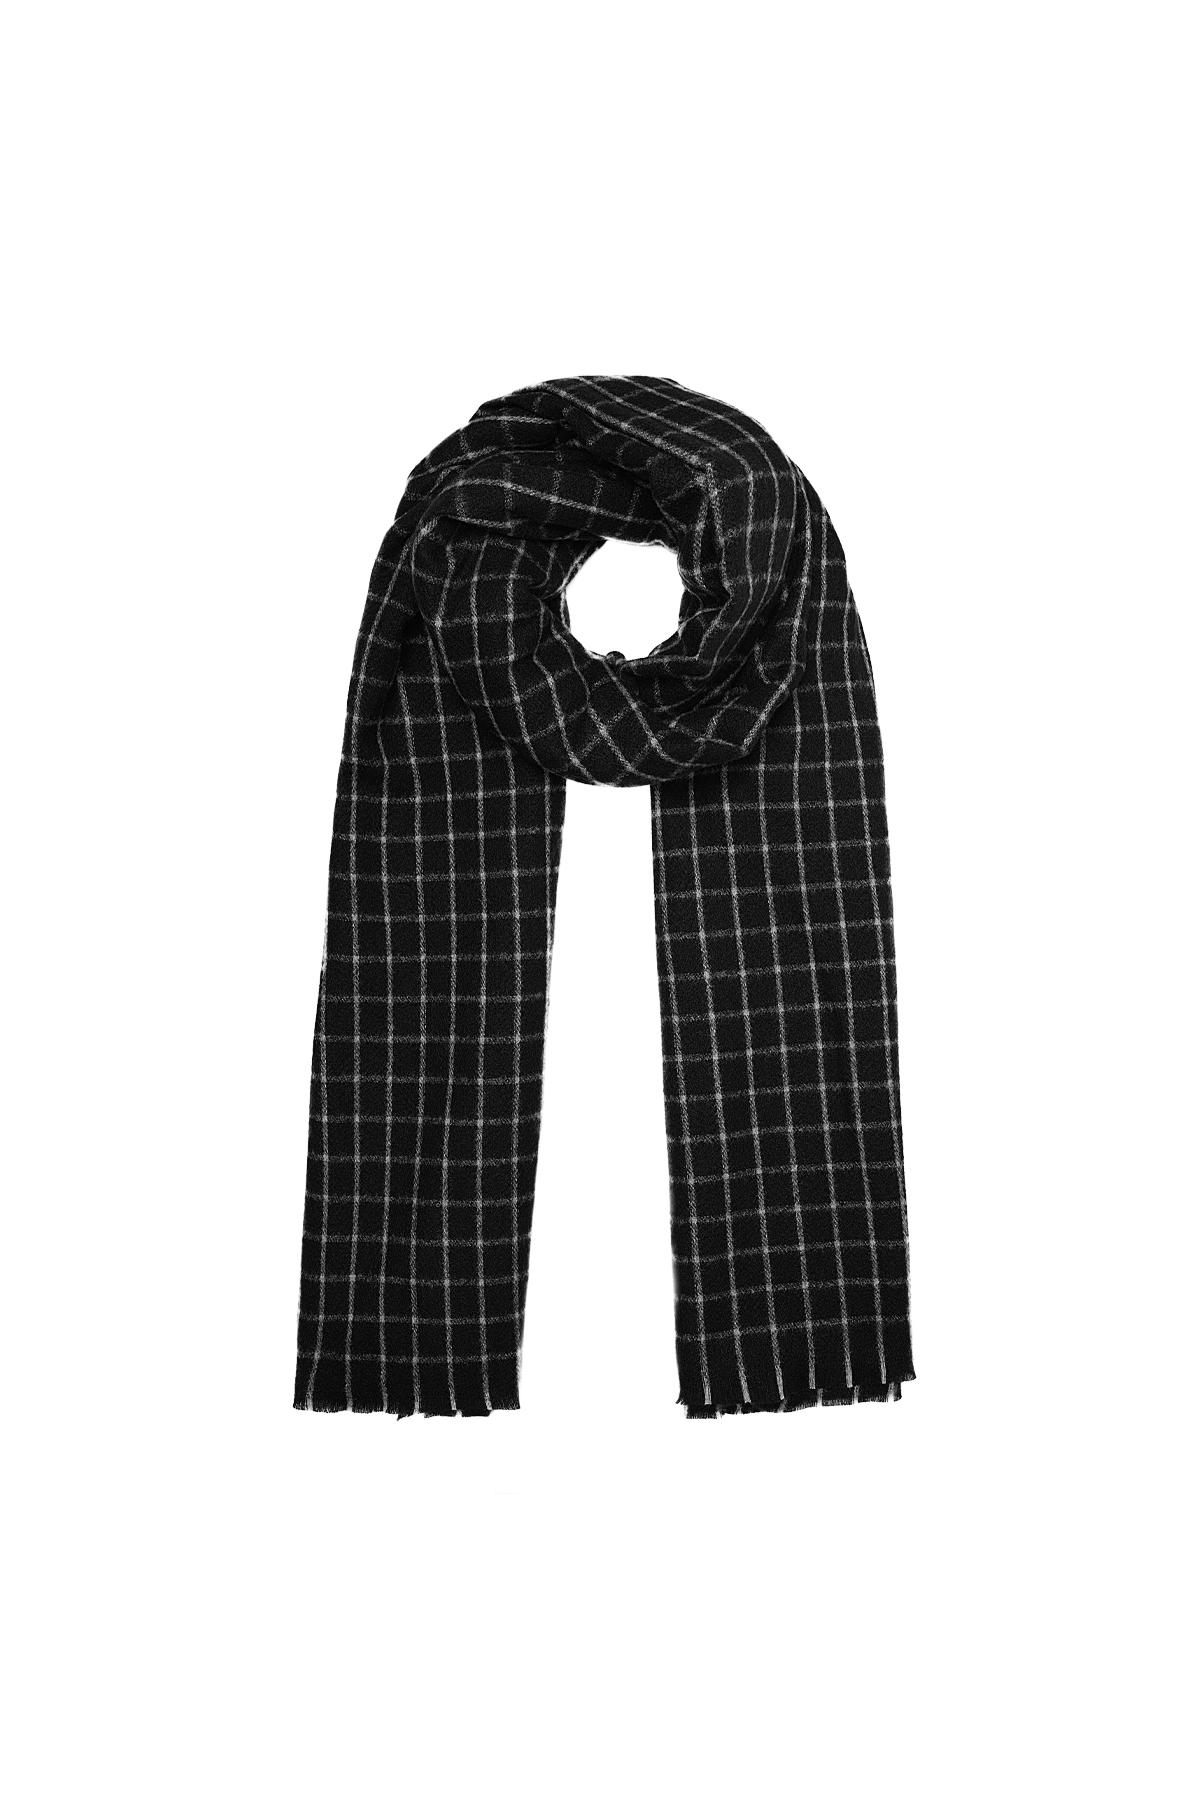 Black and white checkered winter scarf Acrylic